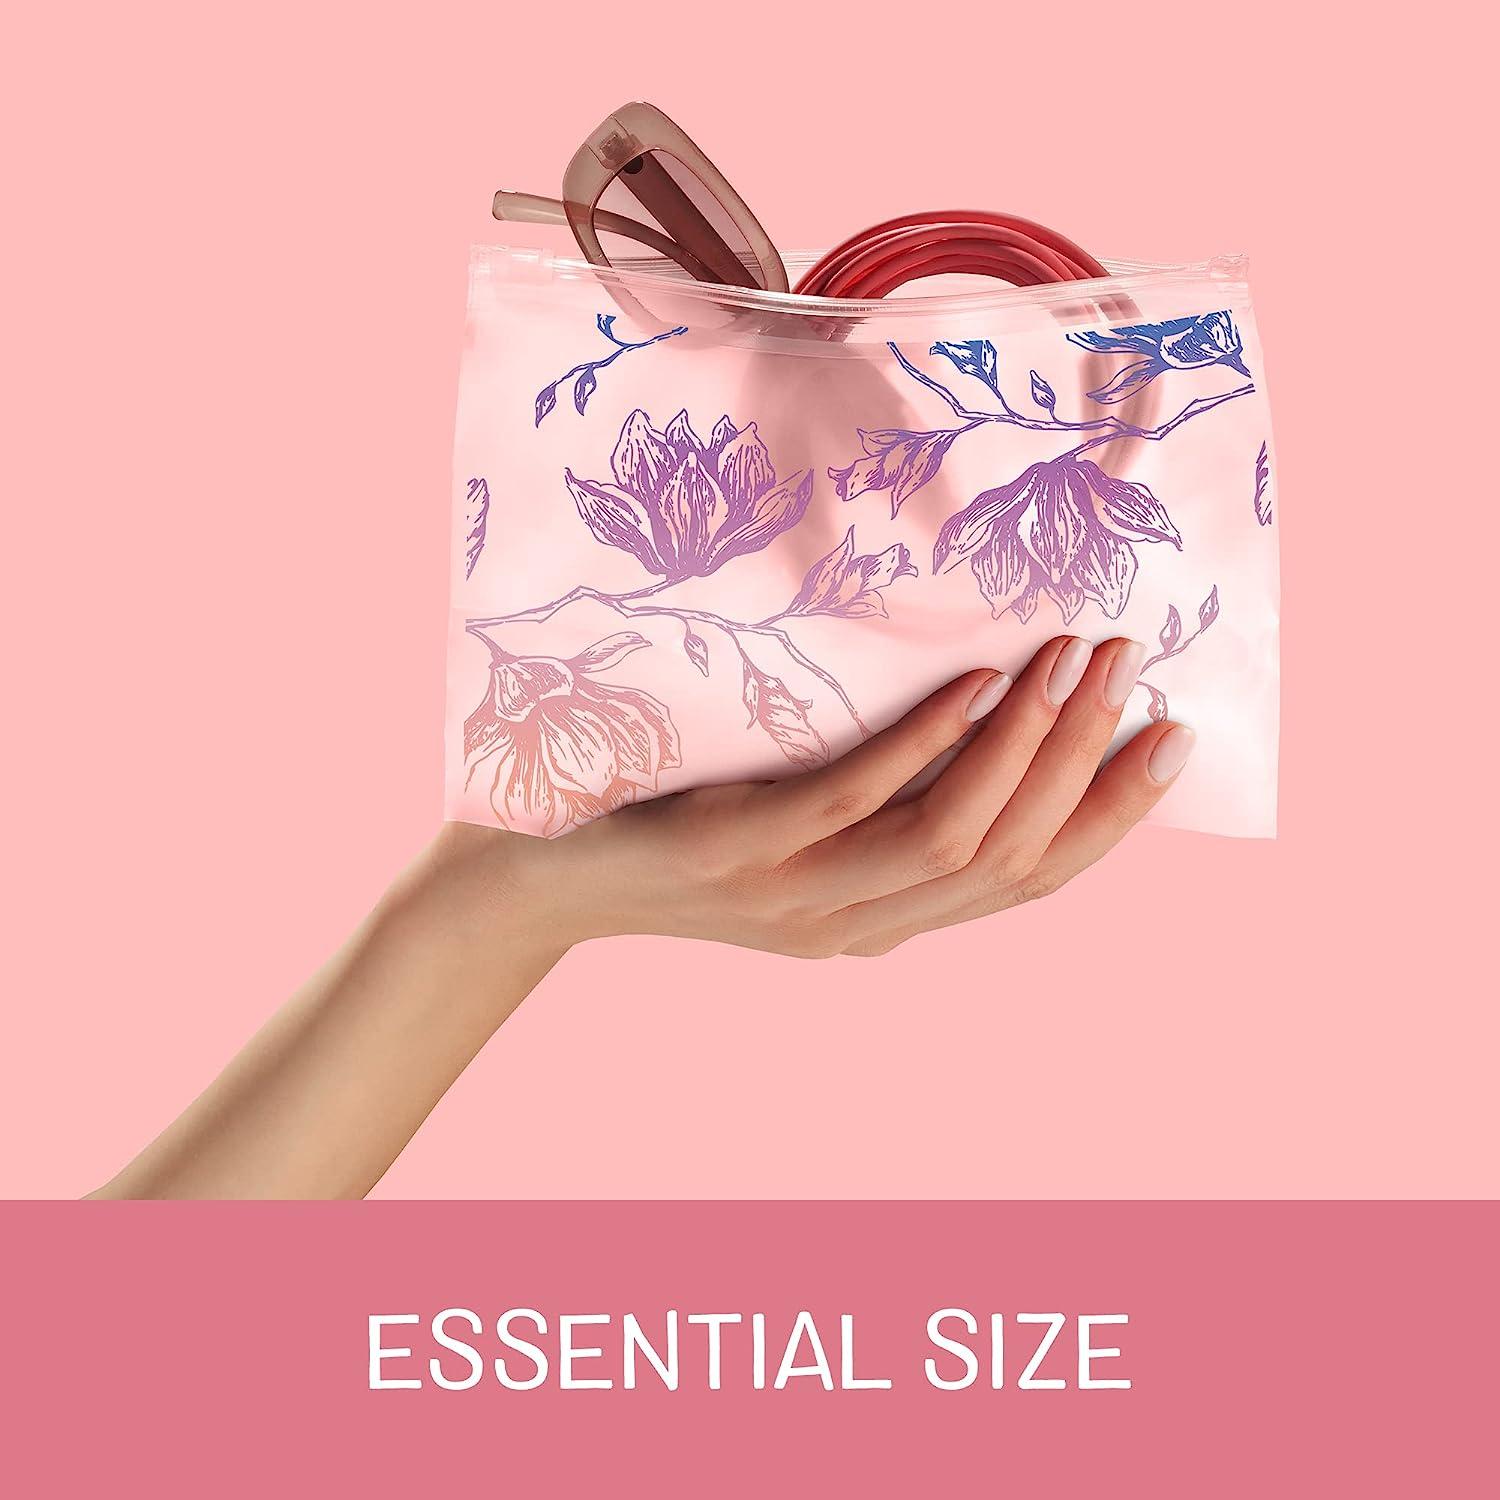 Ziploc Reusable Travel Makeup and Accessory Bag, Great for School or Work,  Charm Collection, 5 Essential Style Bags